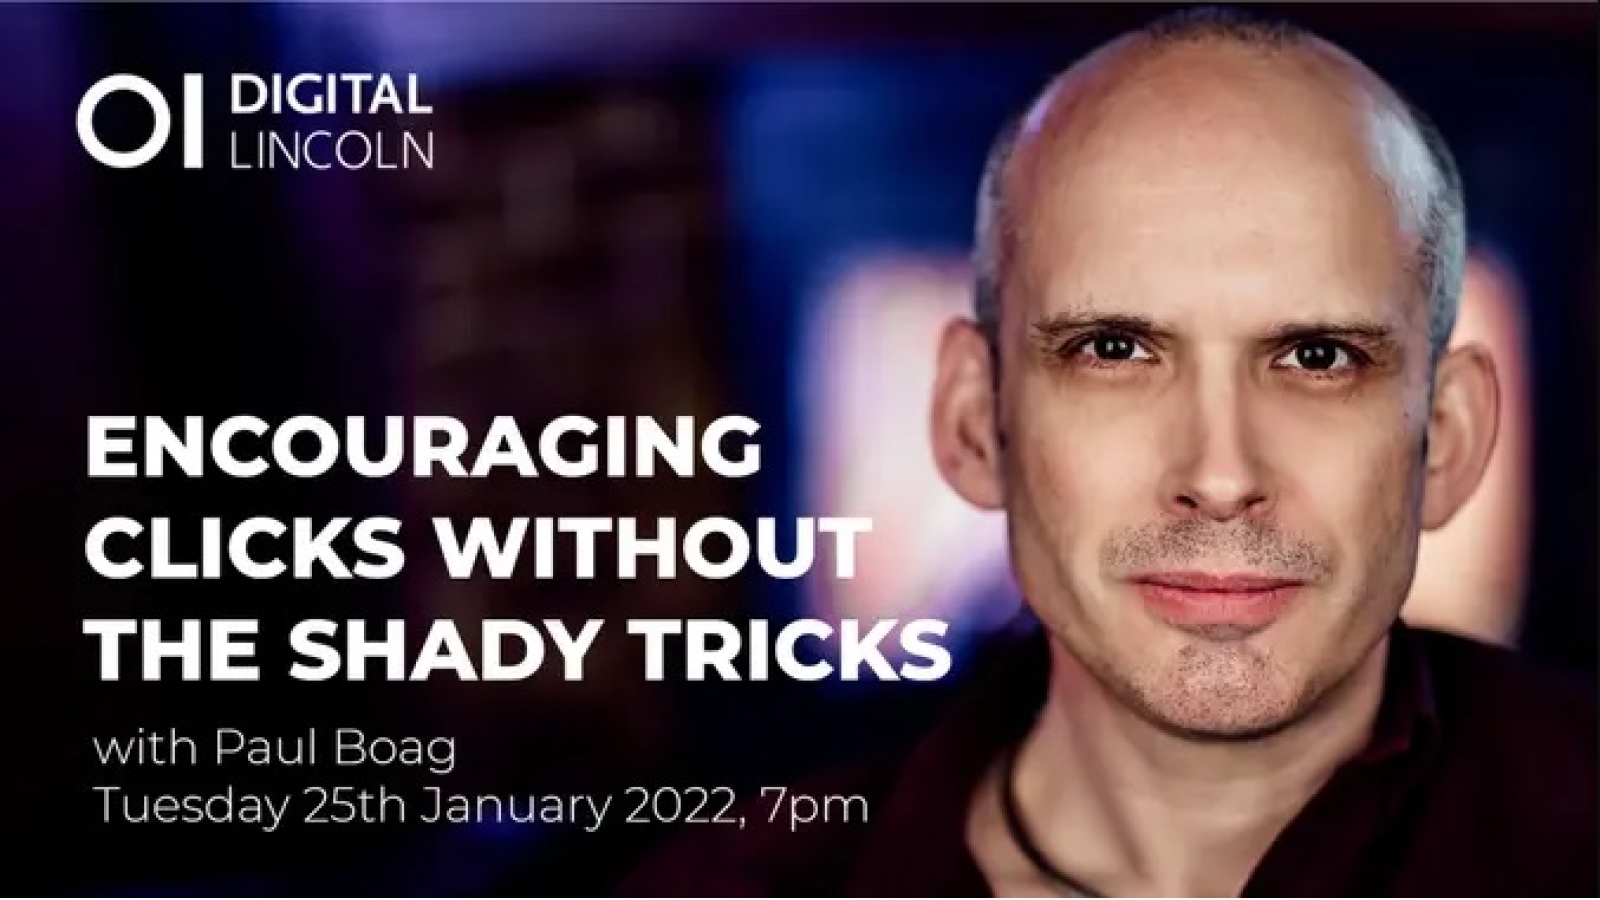 Digital Lincoln Event with Paul Boag, Tuesday 25th January 2022, 7 pm